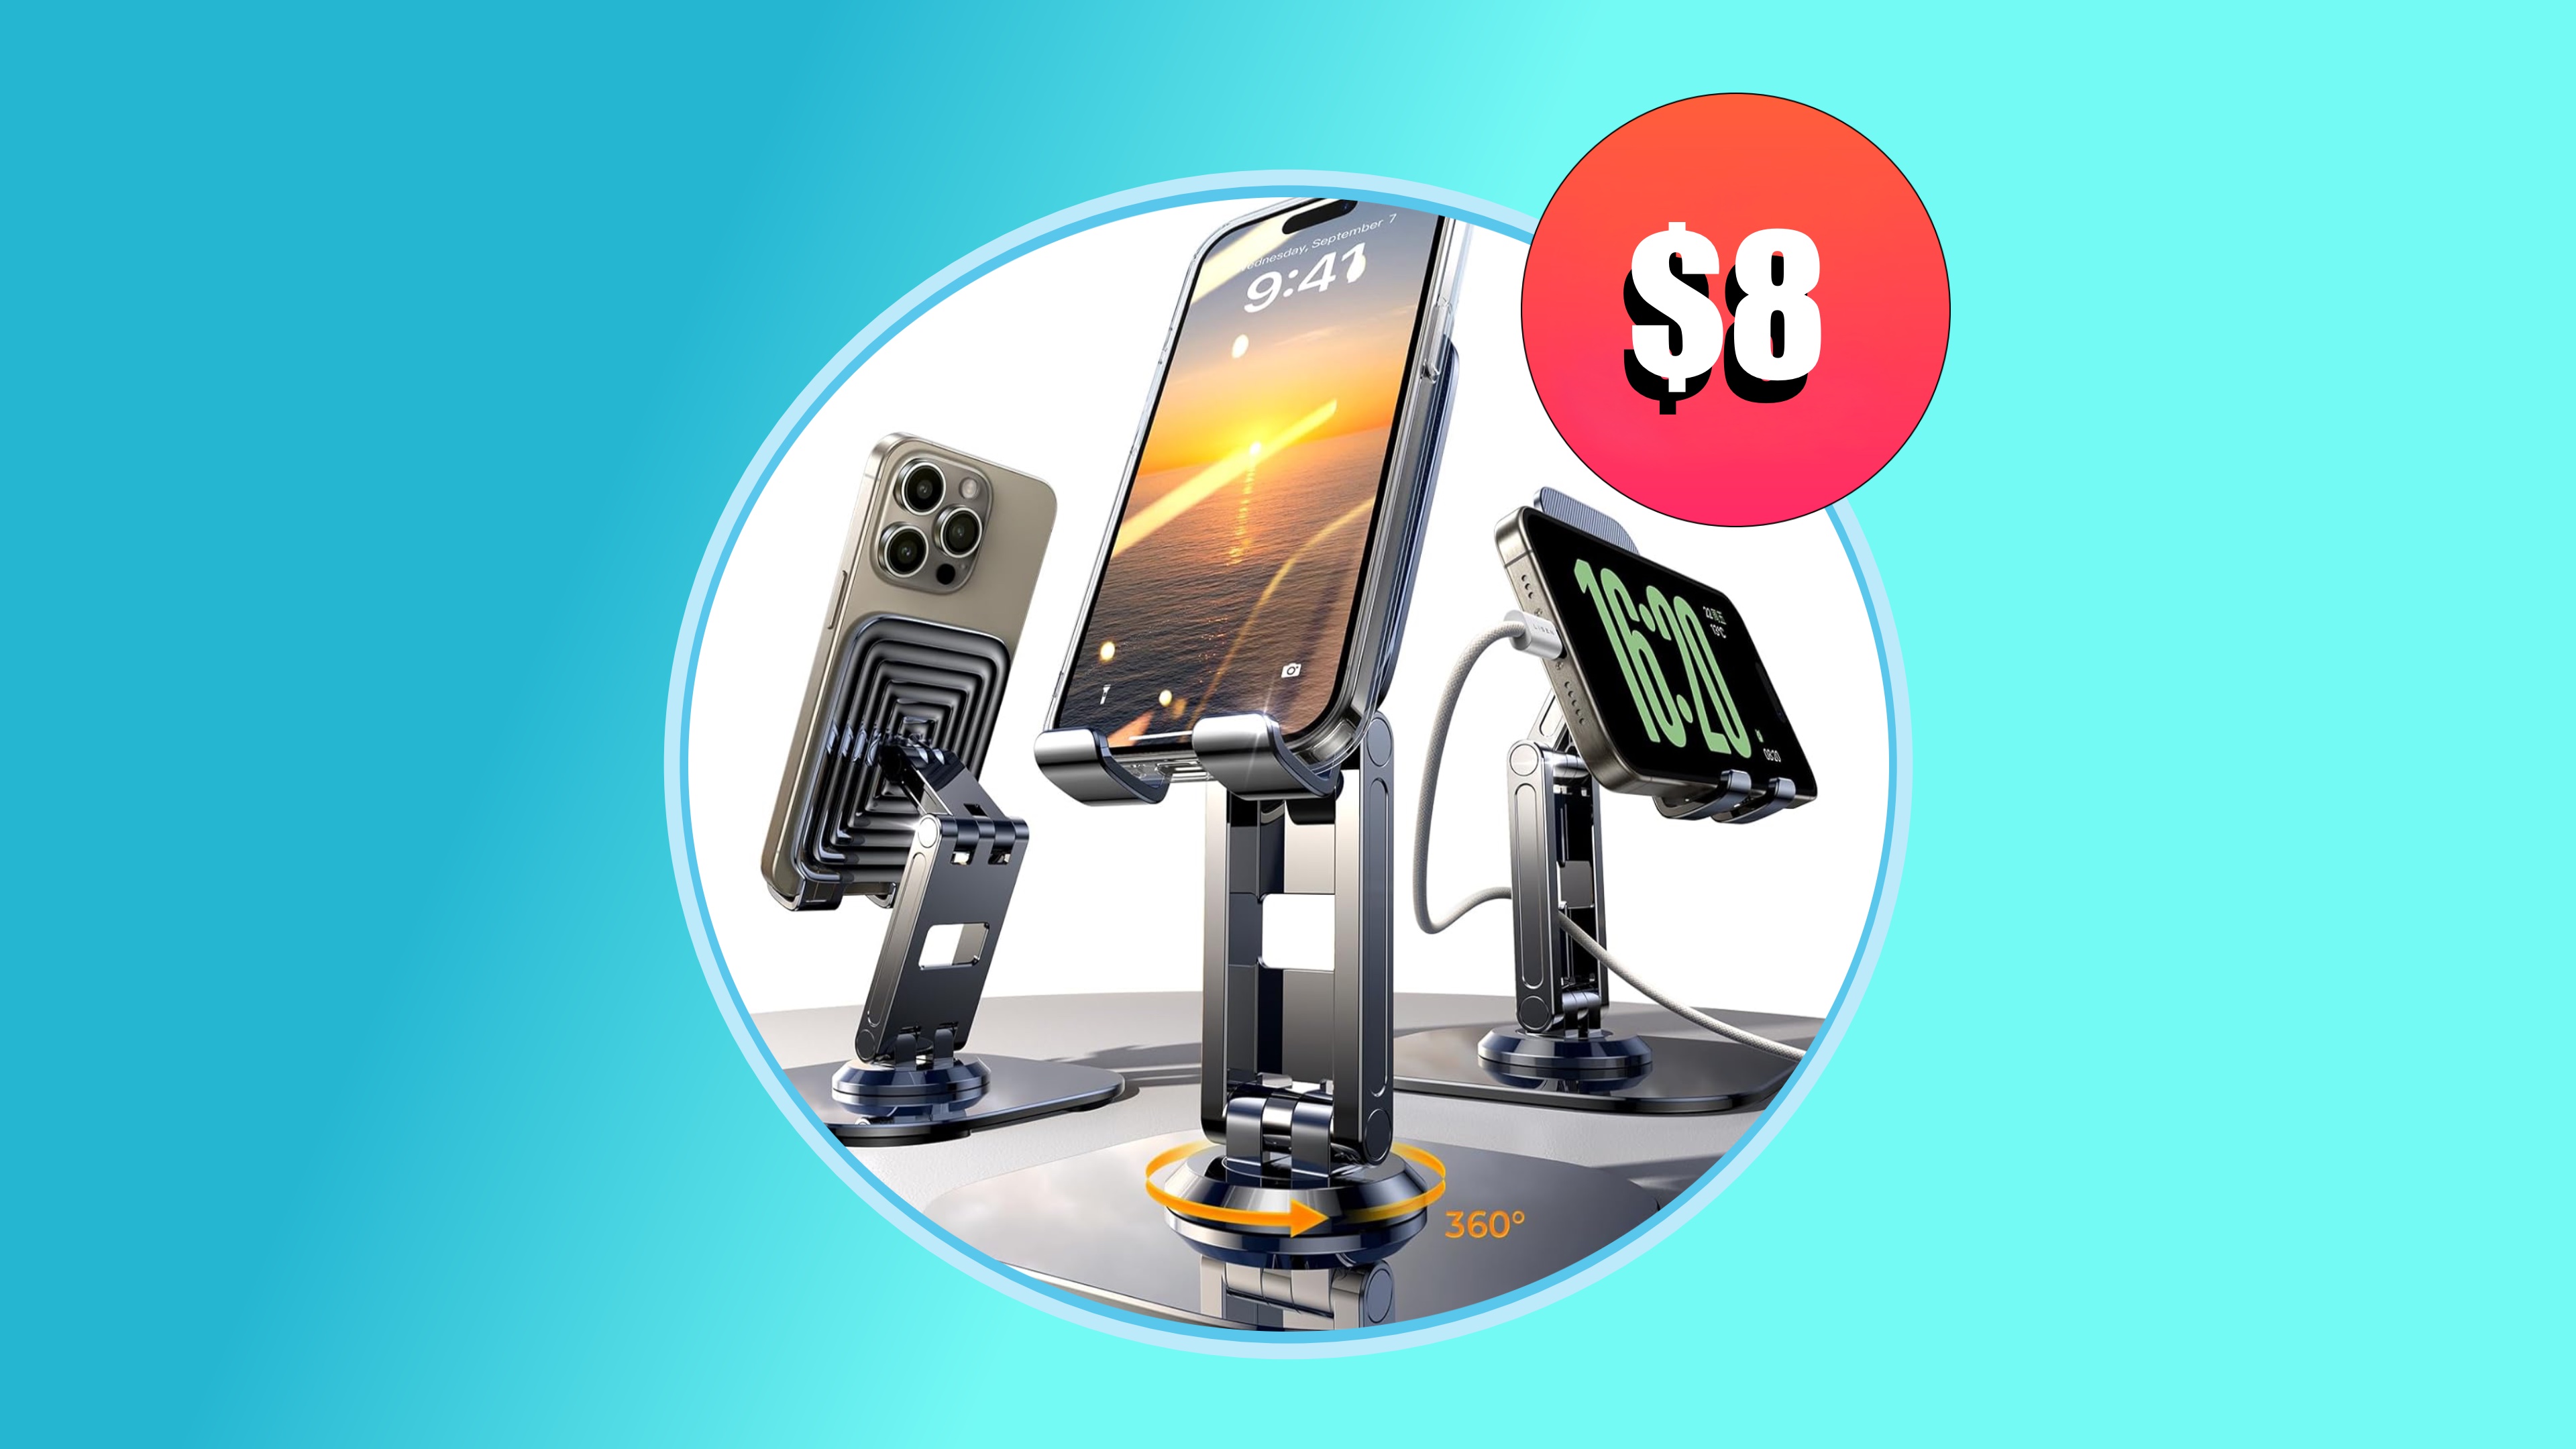 The popular $8 adjustable iPhone stand (2-pack) deal is back